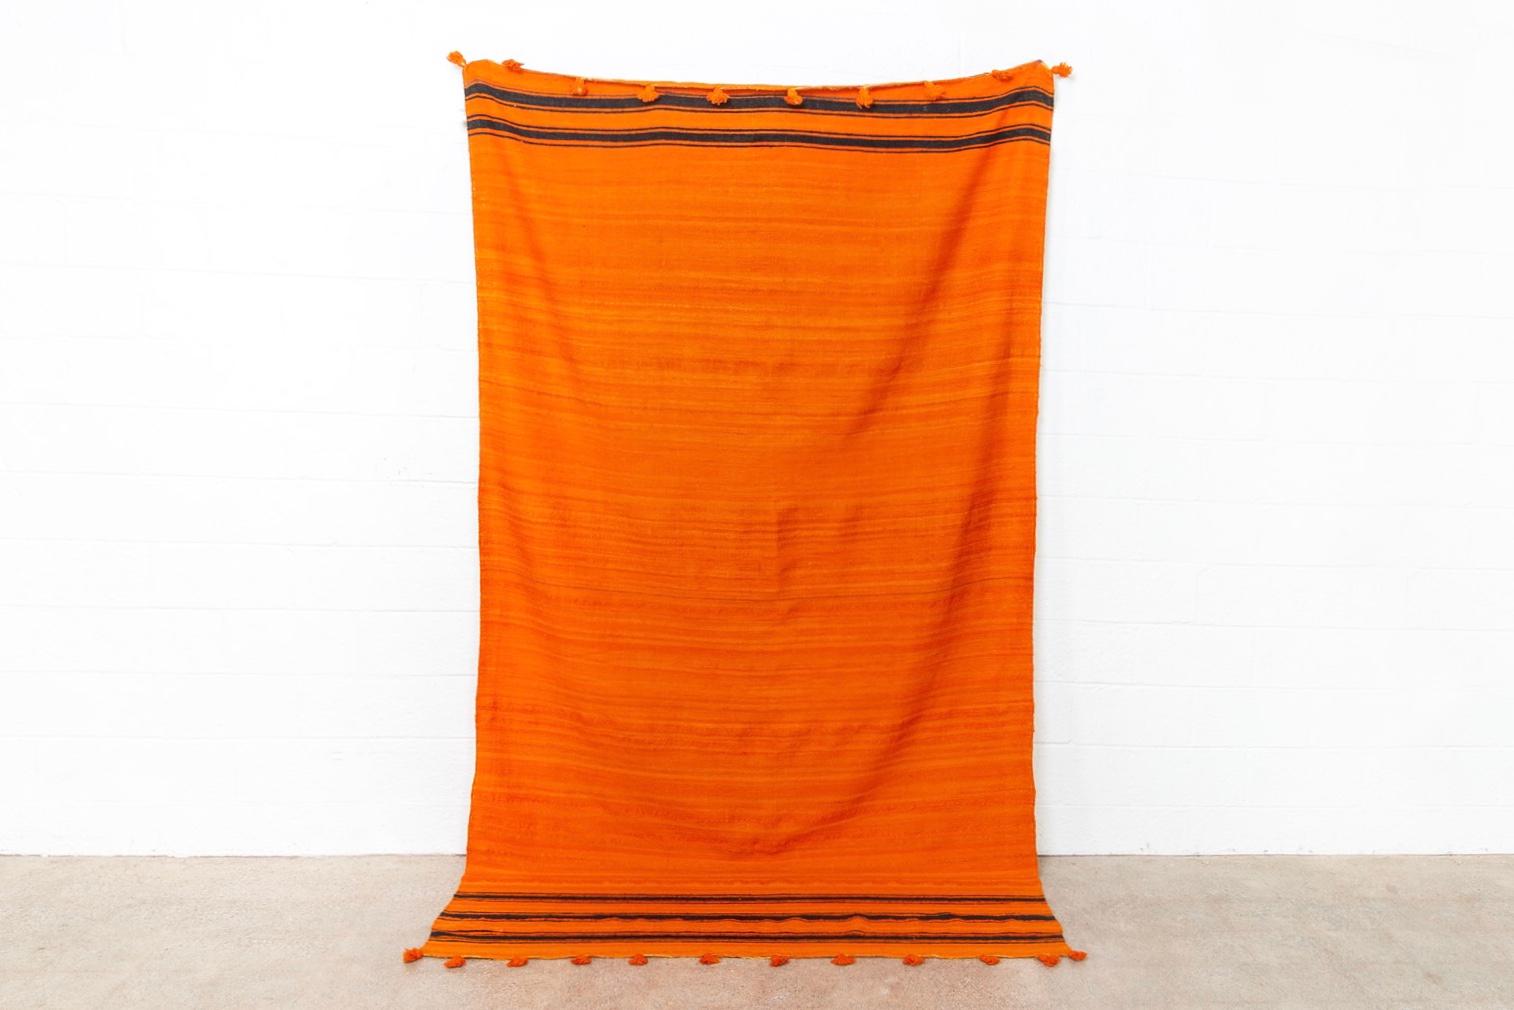 This large vintage handwoven Moroccan Berber Kilim rug is expertly handcrafted from hand-spun wool. The stunning tangerine orange field has subtle variation in shade and features double and triple black horizontal stripes at either end. The rug is